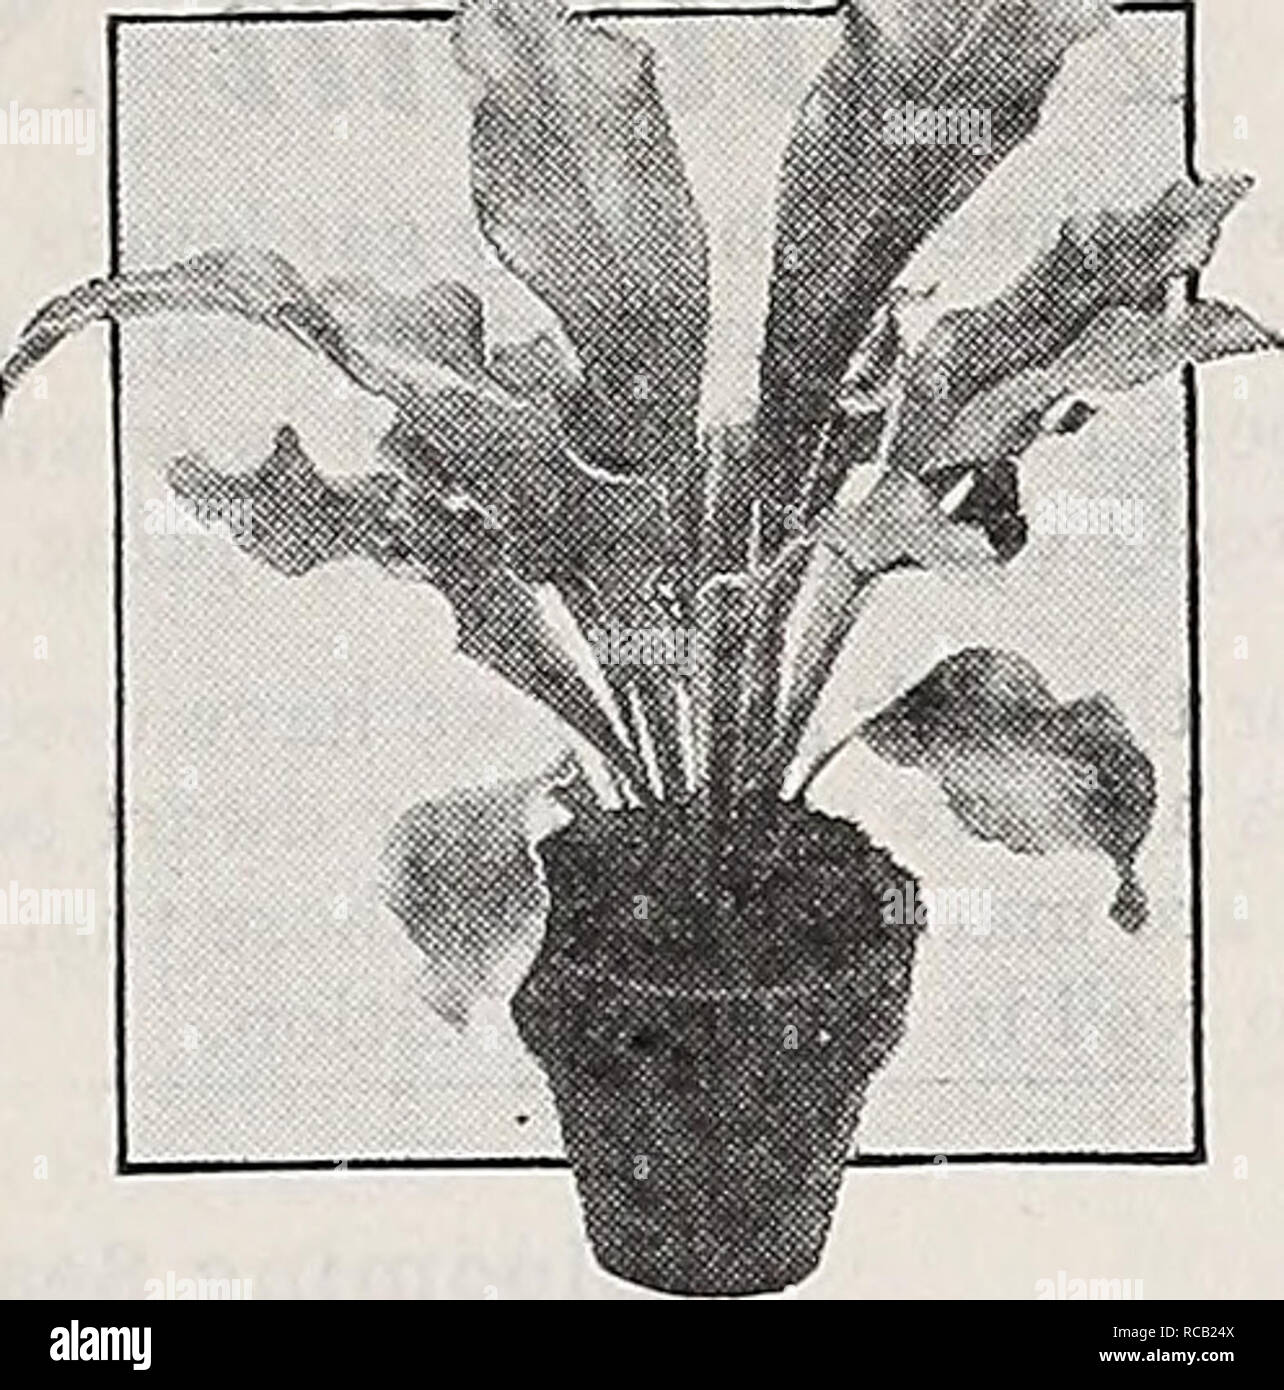 . Dreer's bulbs, plants, roses, shrubs, seeds for autumn planting 1938. Bulbs (Plants) Catalogs; Flowers Seeds Catalogs; Gardening Equipment and supplies Catalogs; Nurseries (Horticulture) Catalogs; Vegetables Seeds Catalogs. Bunny Ear Cactus Opuntia microdasys. Pop- ular and very showy. Has thick heavy joints of ellip- tical form thickly covered with short golden yellow bristles. 35c each. Bird's Nest Fern Asplenium Nidus Avis. A choice Fern for the home with broad green fronds. 3y2-inch pots 75c ea. 5-inch pots $1.50 each Ostrich Plume Fern Nephrolepis Norwood. A very pretty, crested form of Stock Photo